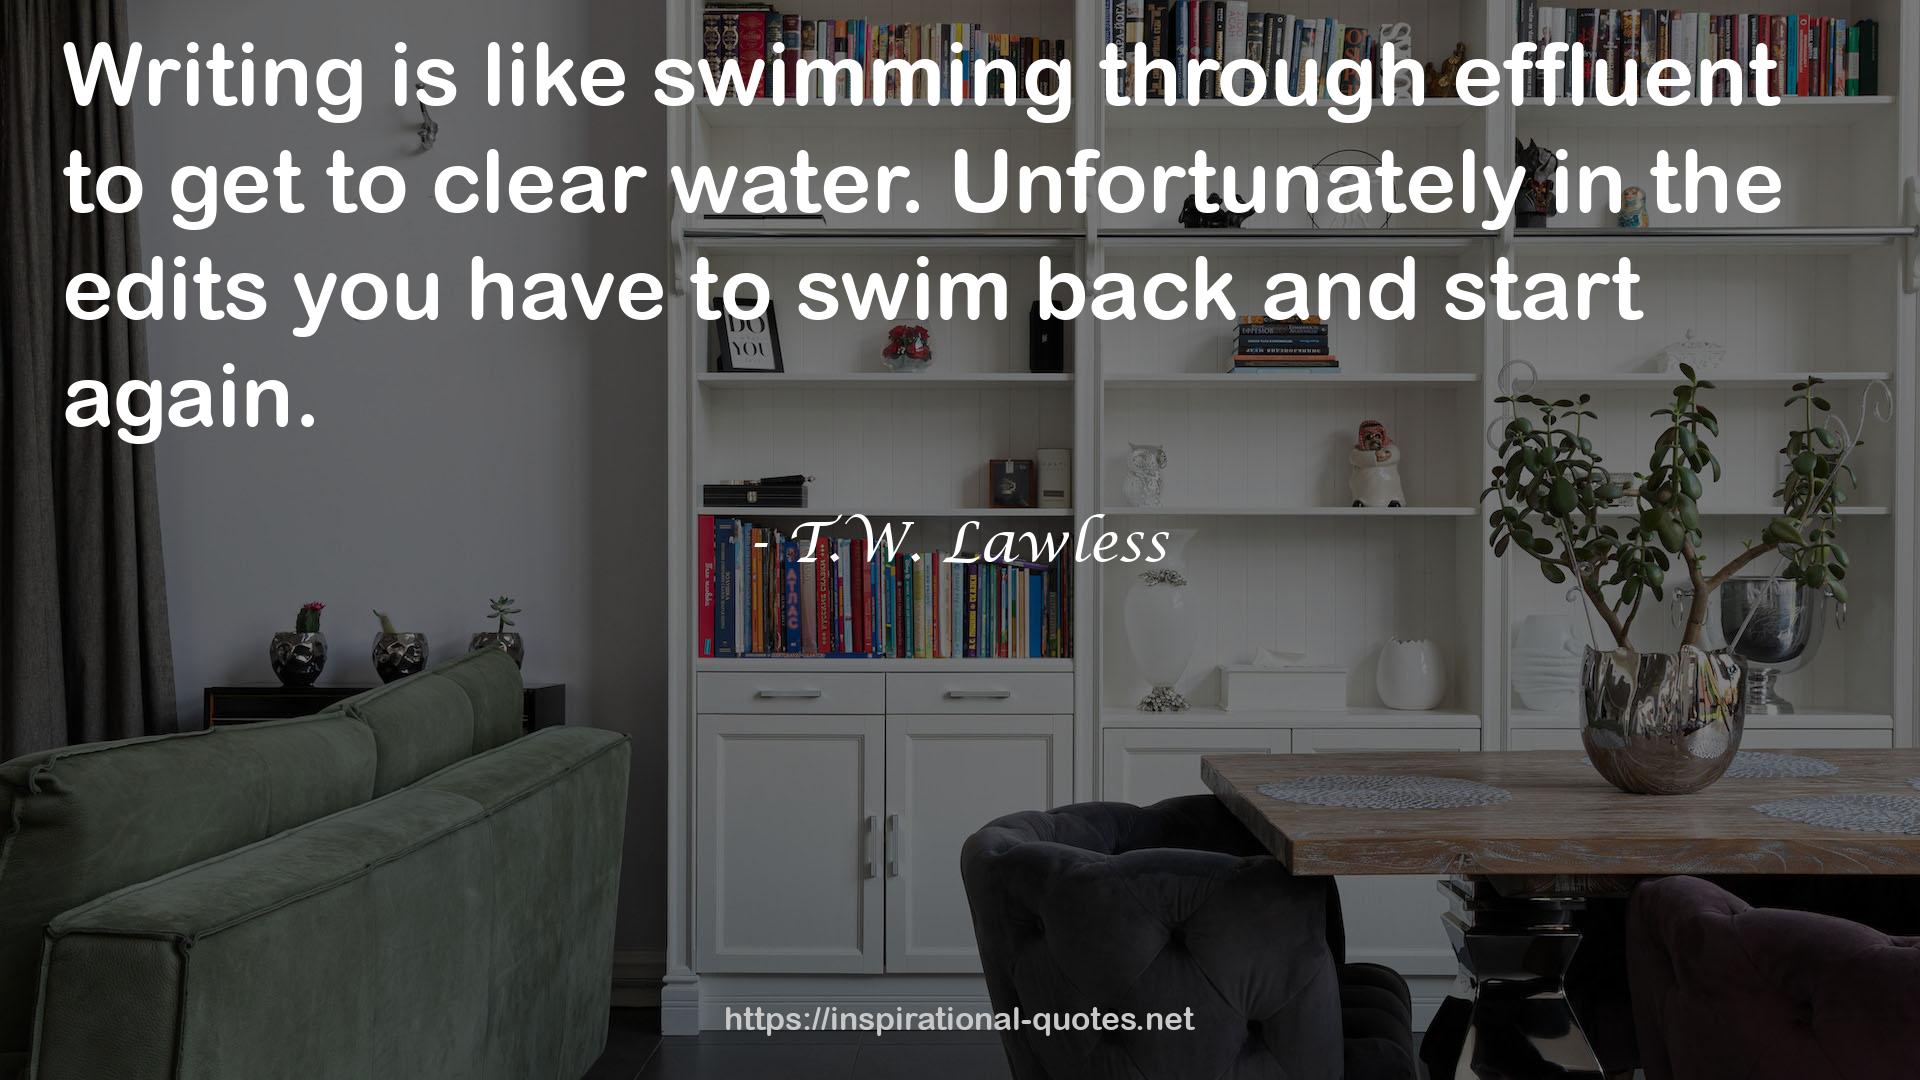 T.W. Lawless QUOTES